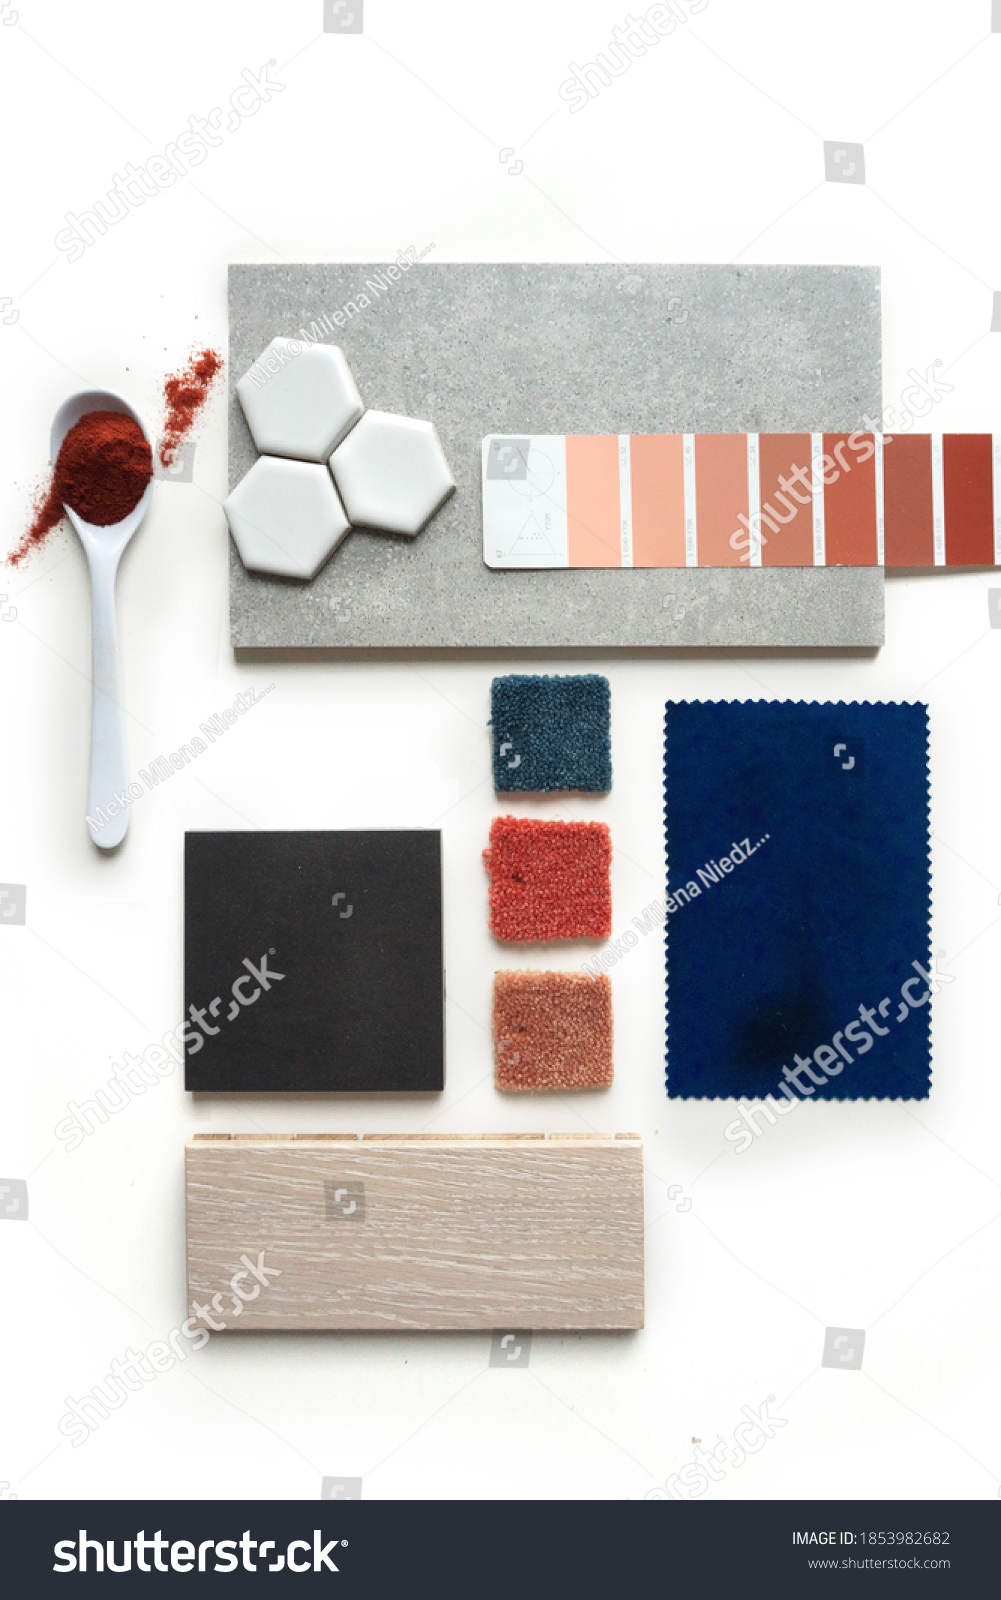 Top view moodboard. Material samples. Blue, red, orange, black, light wood.A spoonful of red color           #1853982682